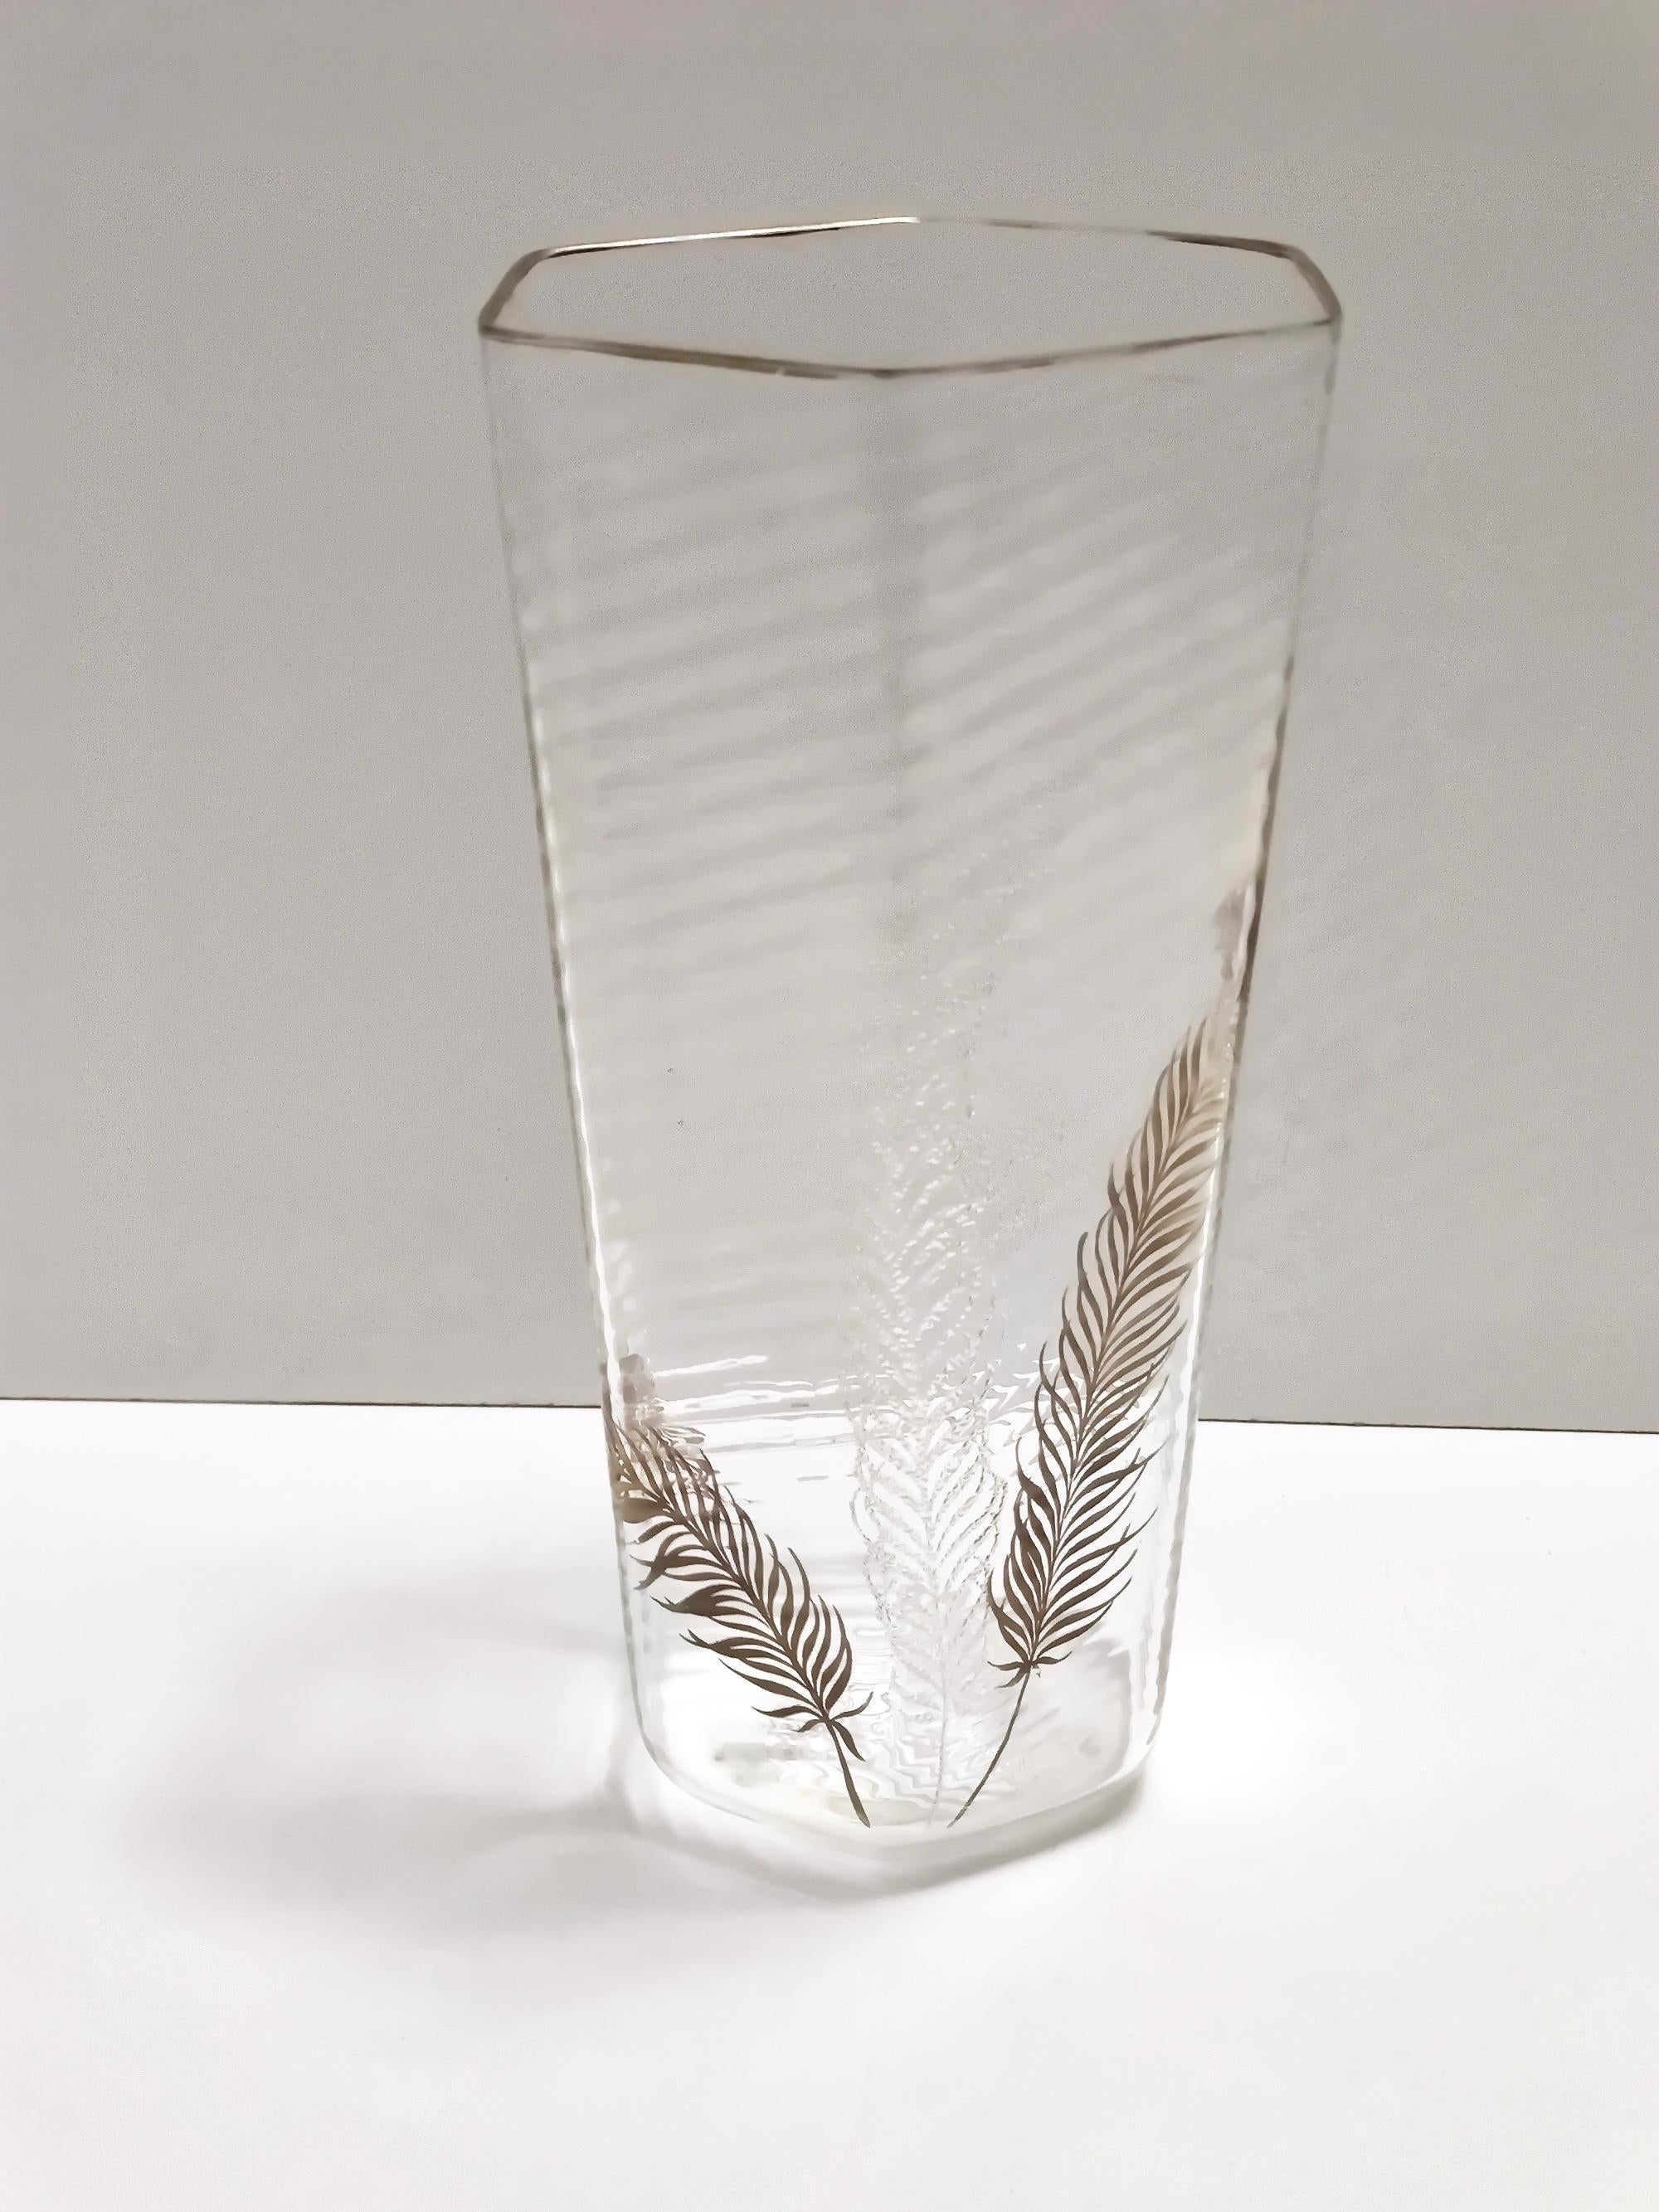 Made in Italy, 1950s.
This rare and elegant vase by Cenedese is made in thin turned Murano glass.
The conical hexagonal section was obtained by manual mold blowing, with hot-applied pure gold edging and leaves, and glass leaf in relief.
It is a